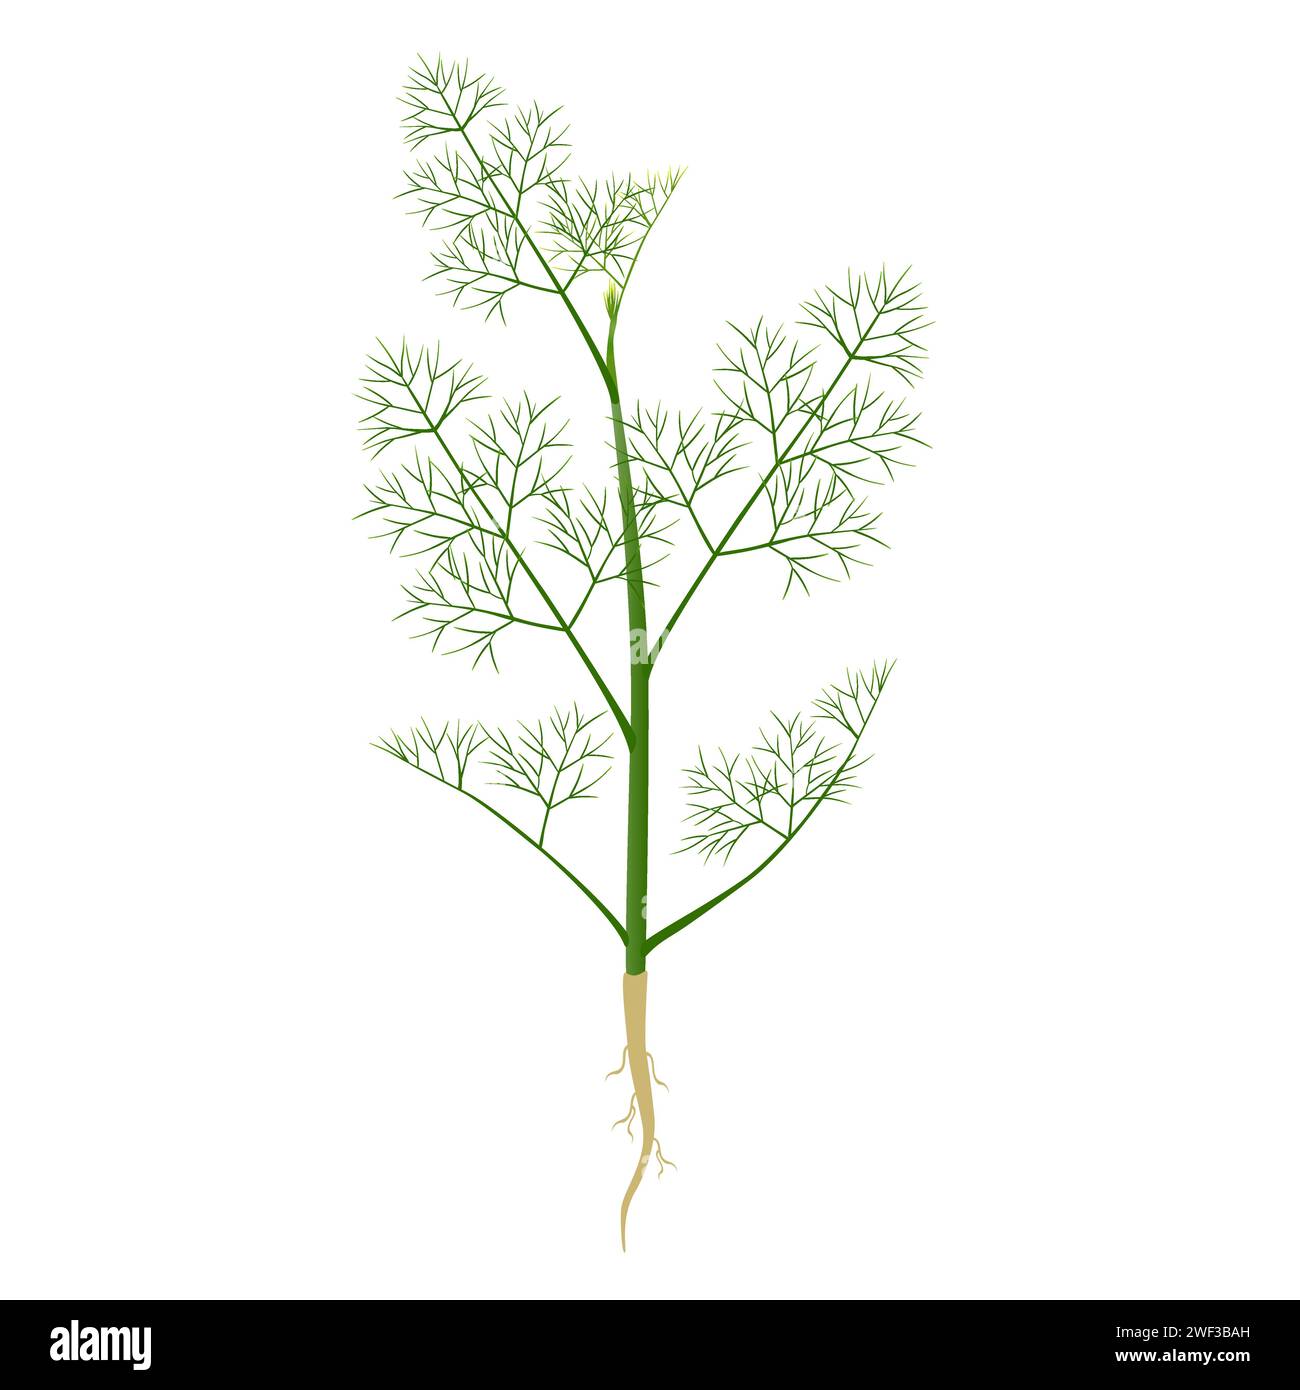 Dill plant with roots on a white background. Stock Vector